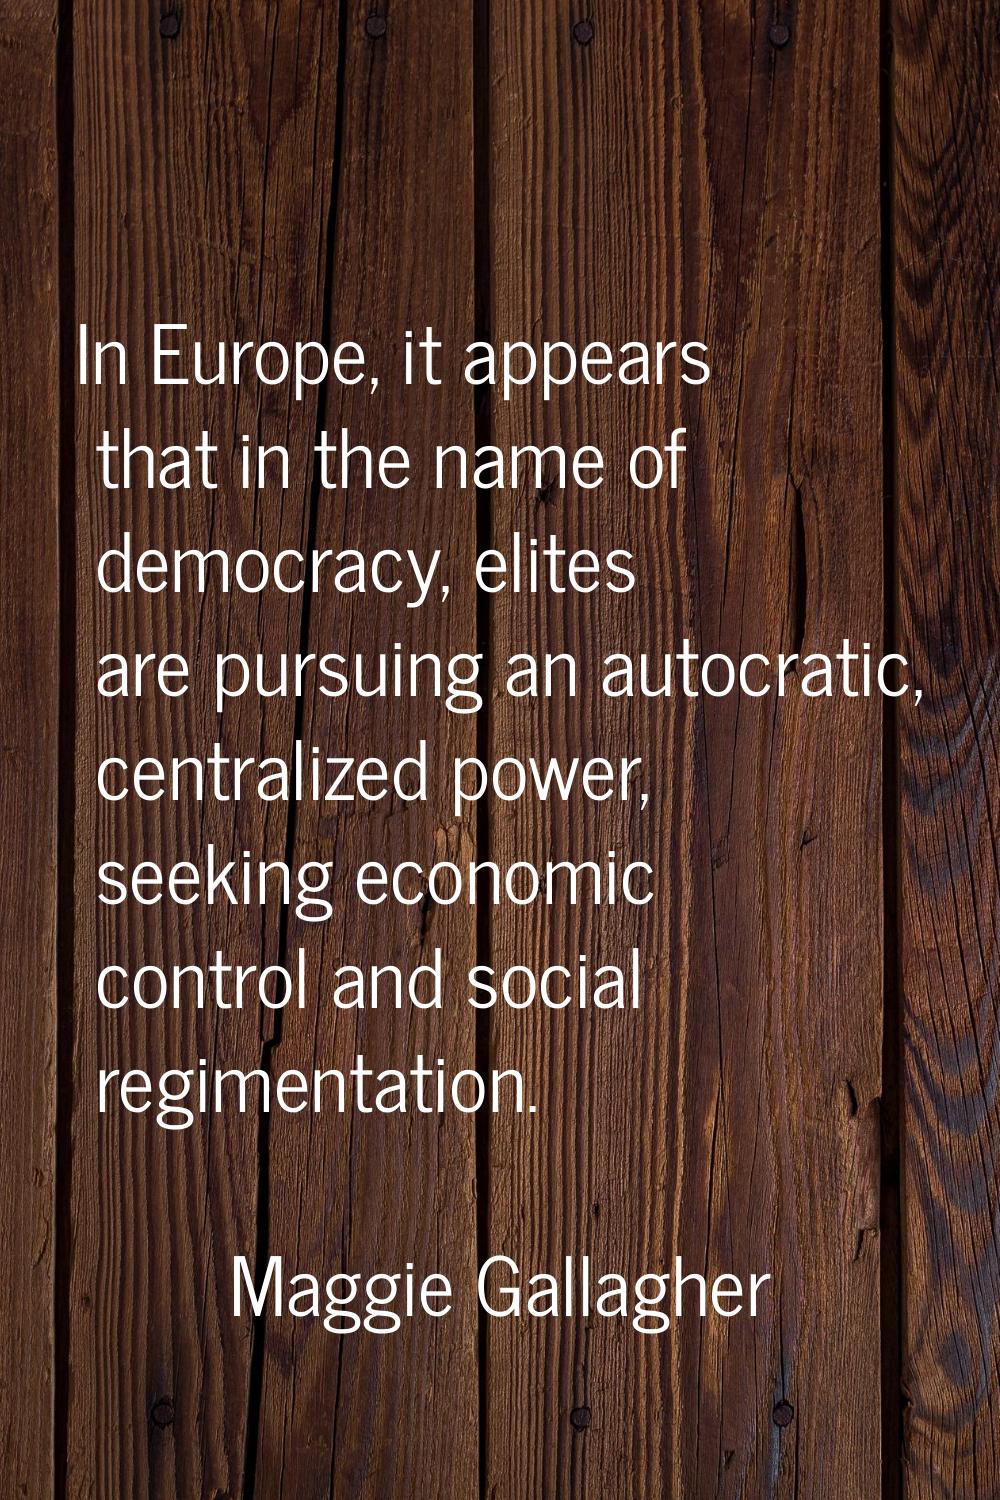 In Europe, it appears that in the name of democracy, elites are pursuing an autocratic, centralized